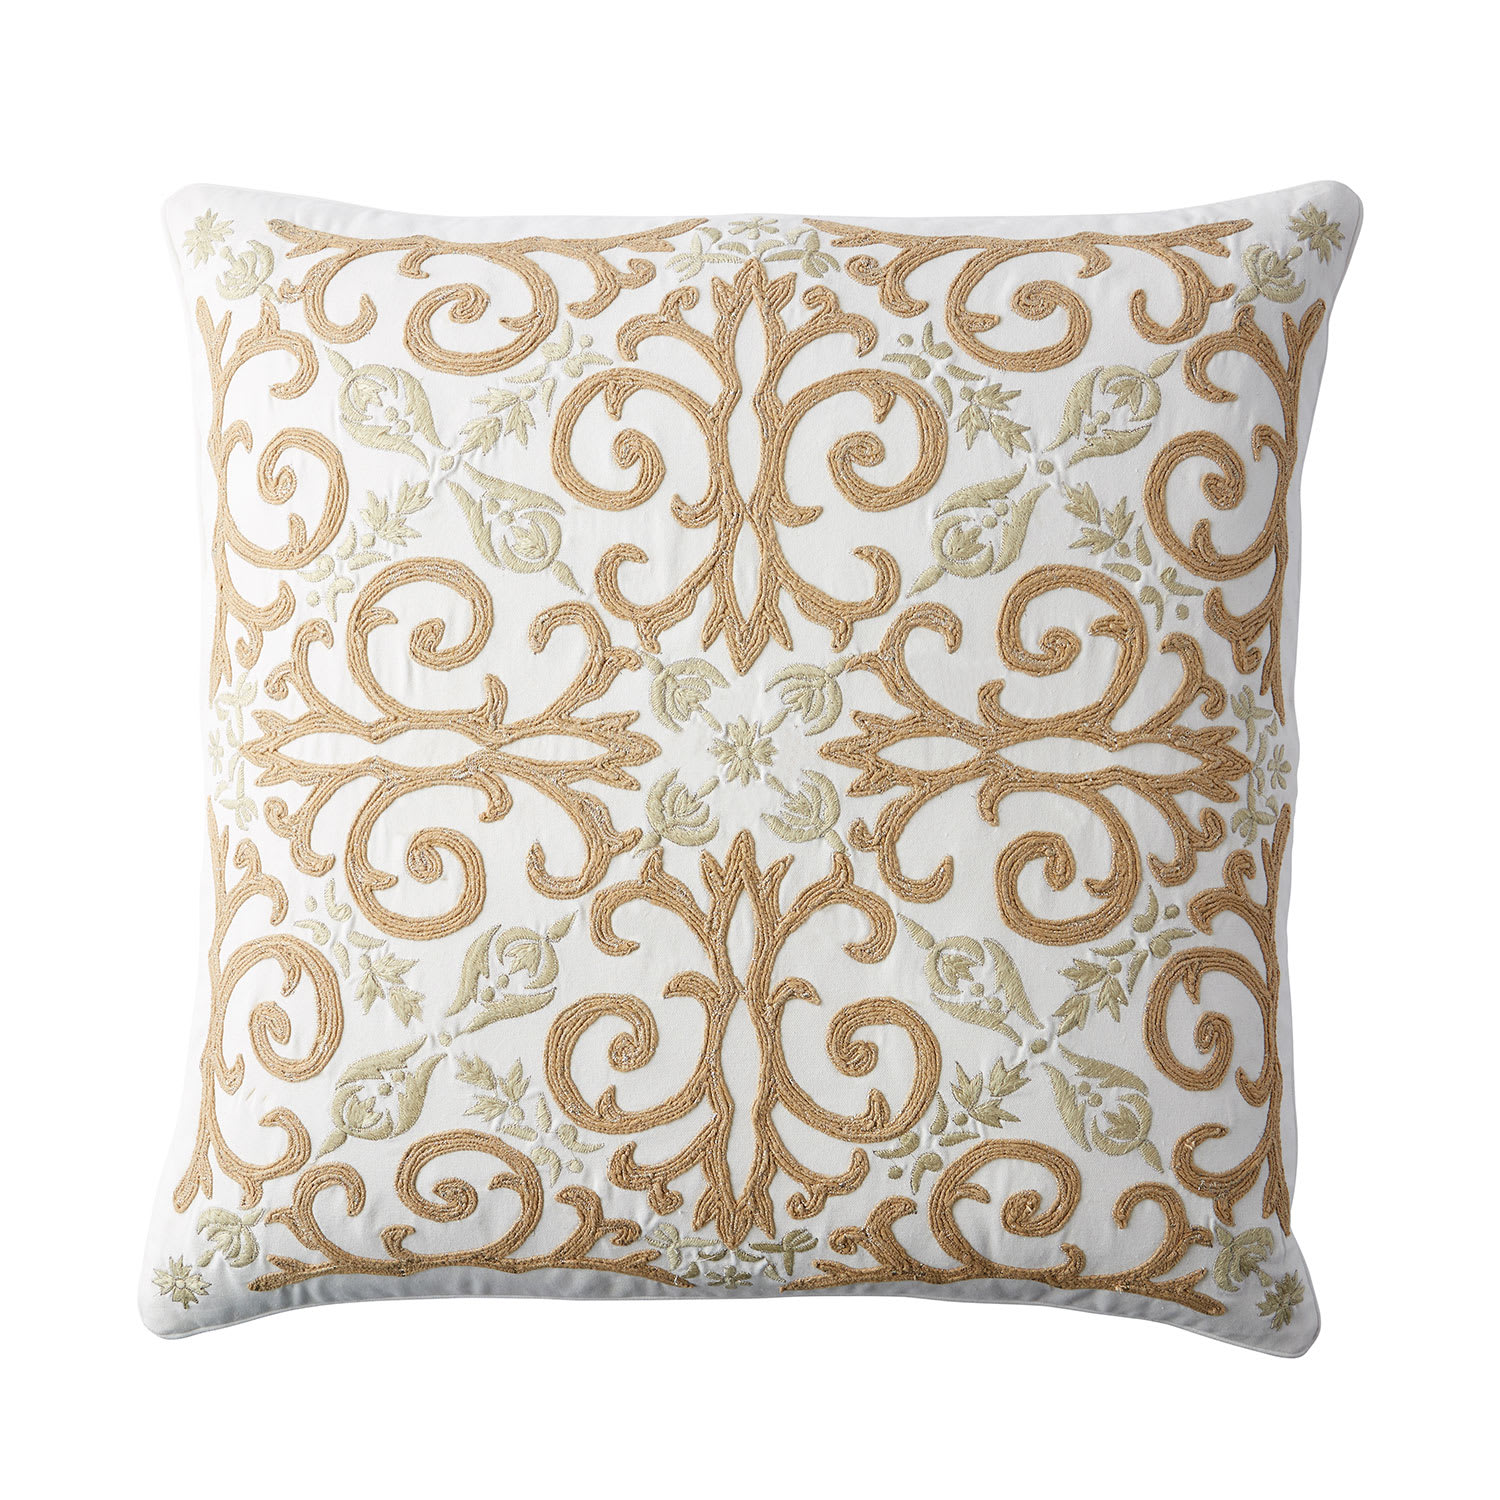 Gold Medallion Embroidered Pillow Cover - Medallion